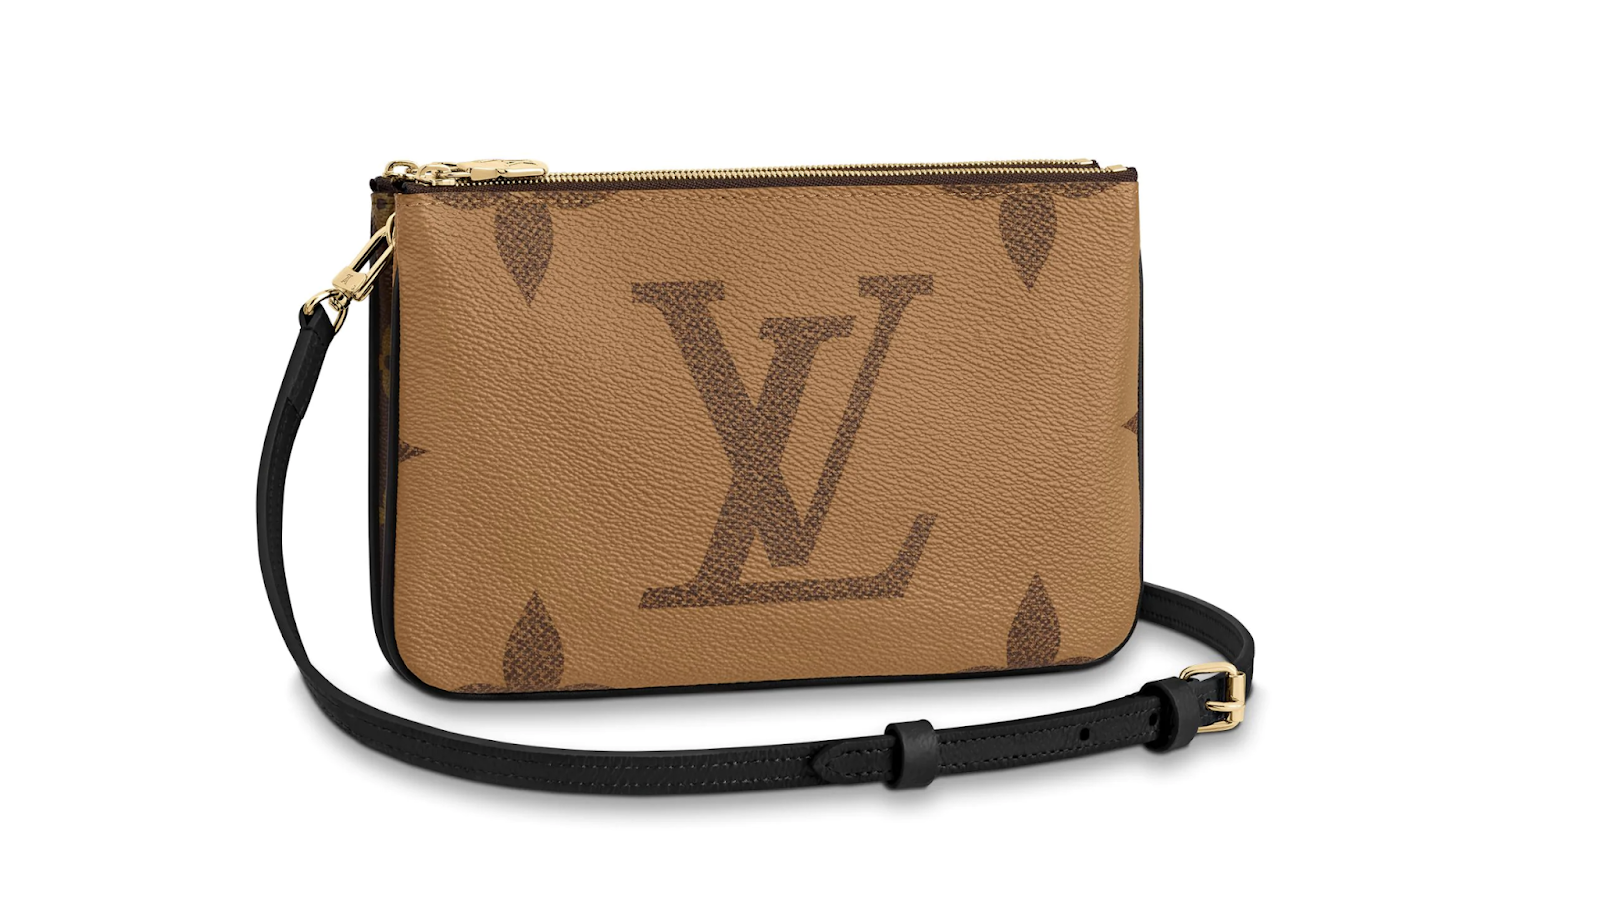 VIEWER REQUEST: Louis Vuitton Double Zip Pochette TWO YEAR Review